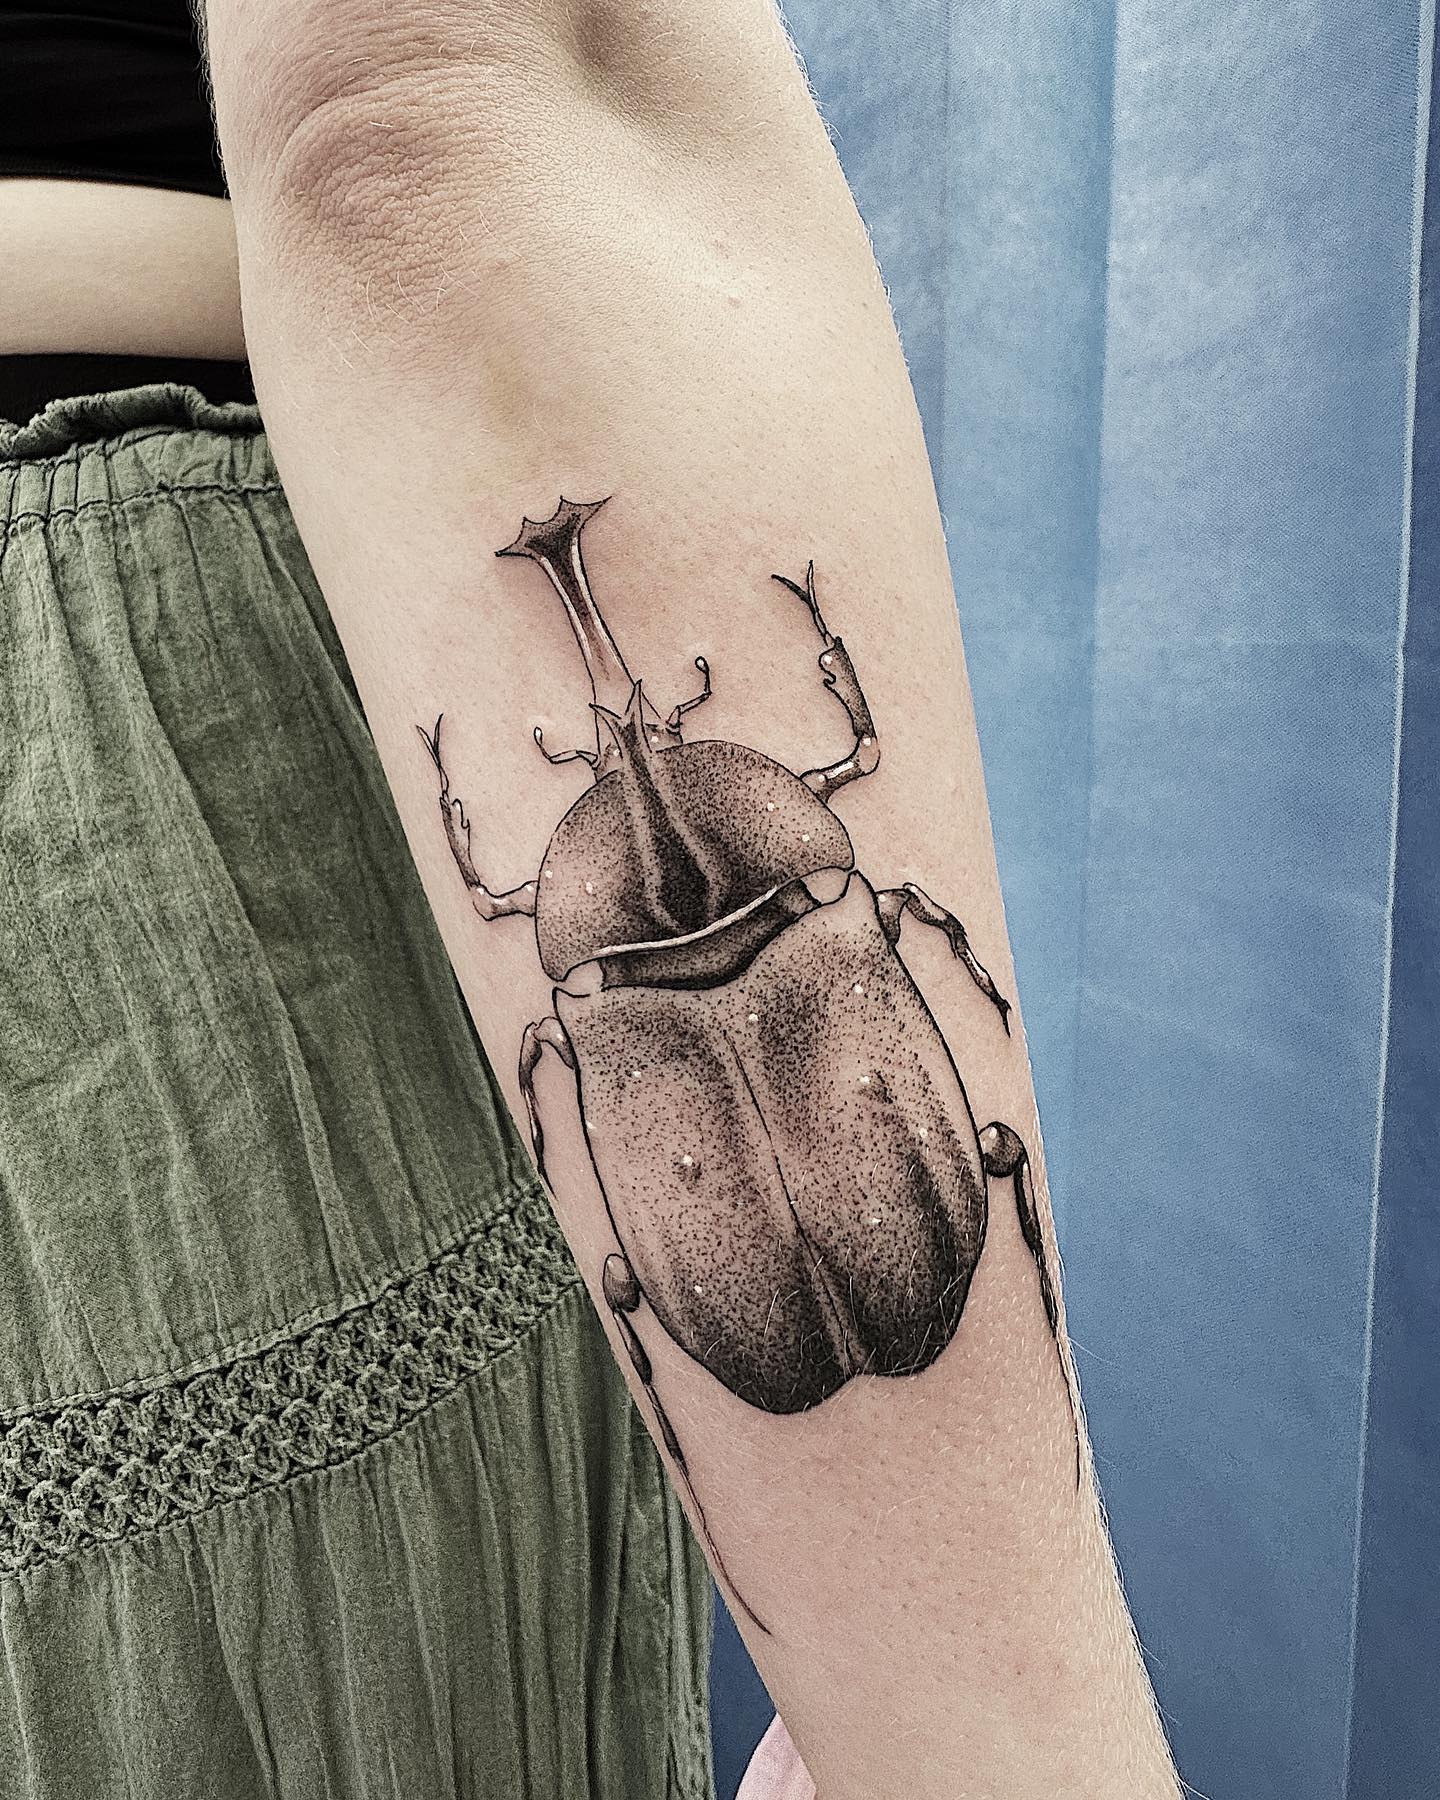 Rainbow king stag beetle by Sanches - Joya tattoo collective Sydney : r/ tattoos